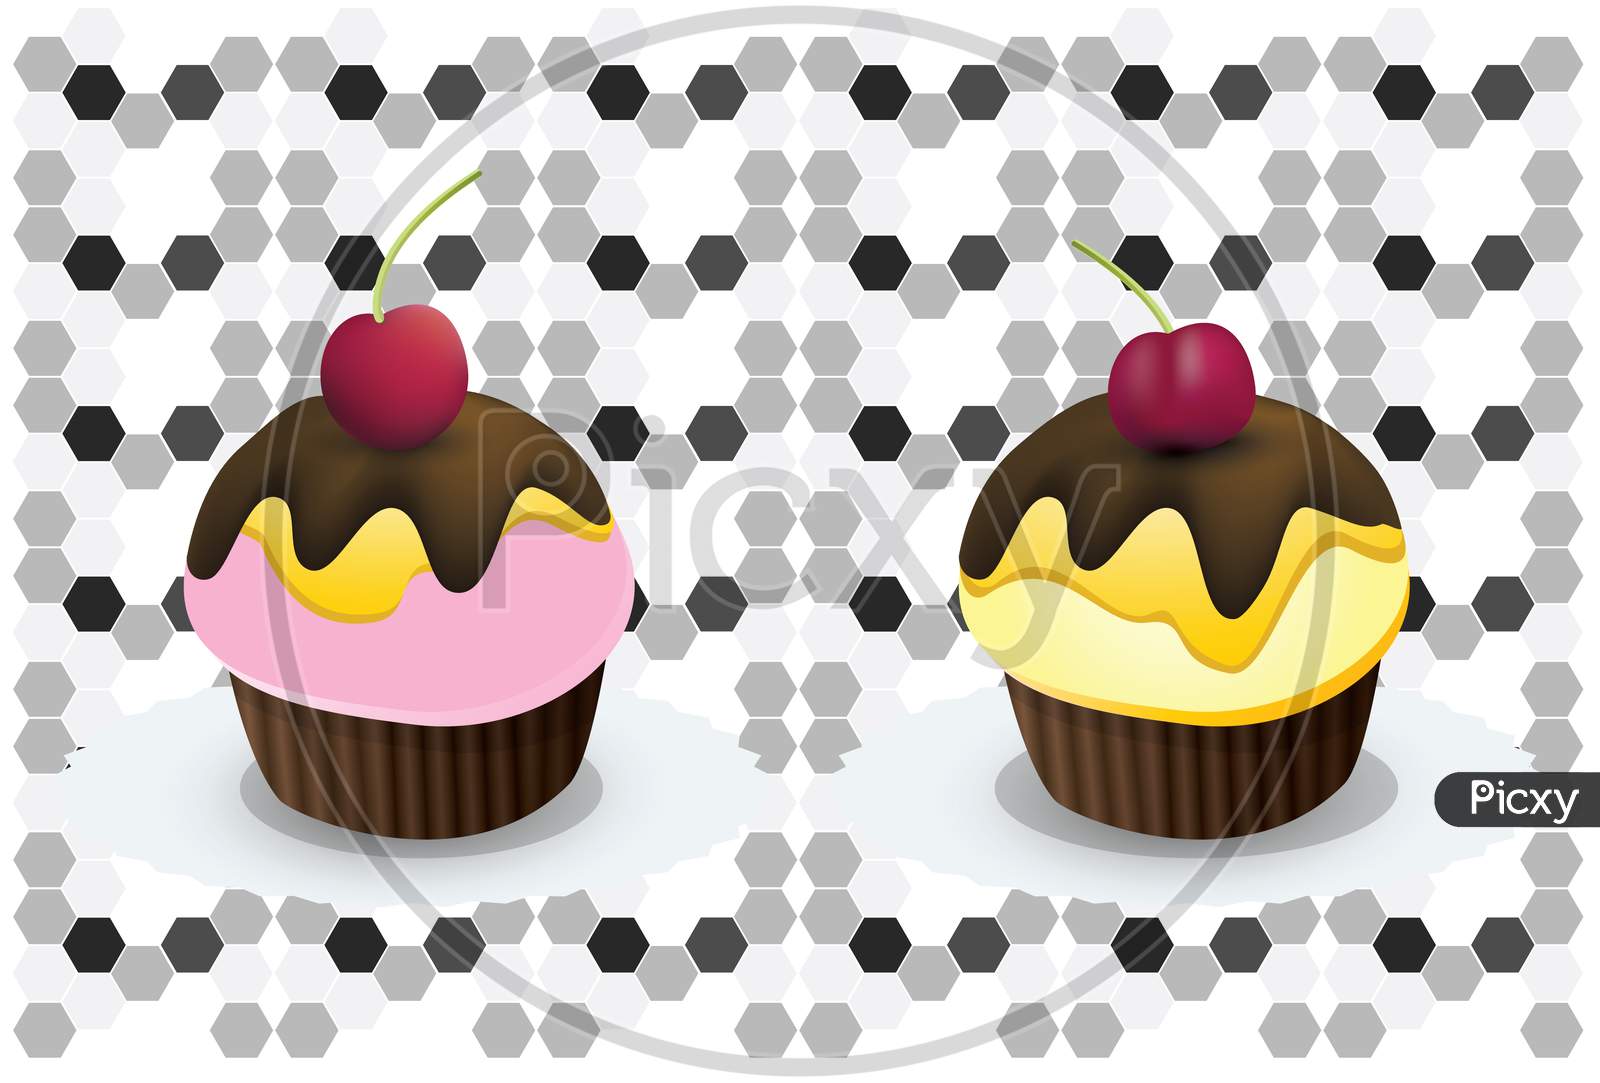 Cupcakes Are On Light And Dark Background